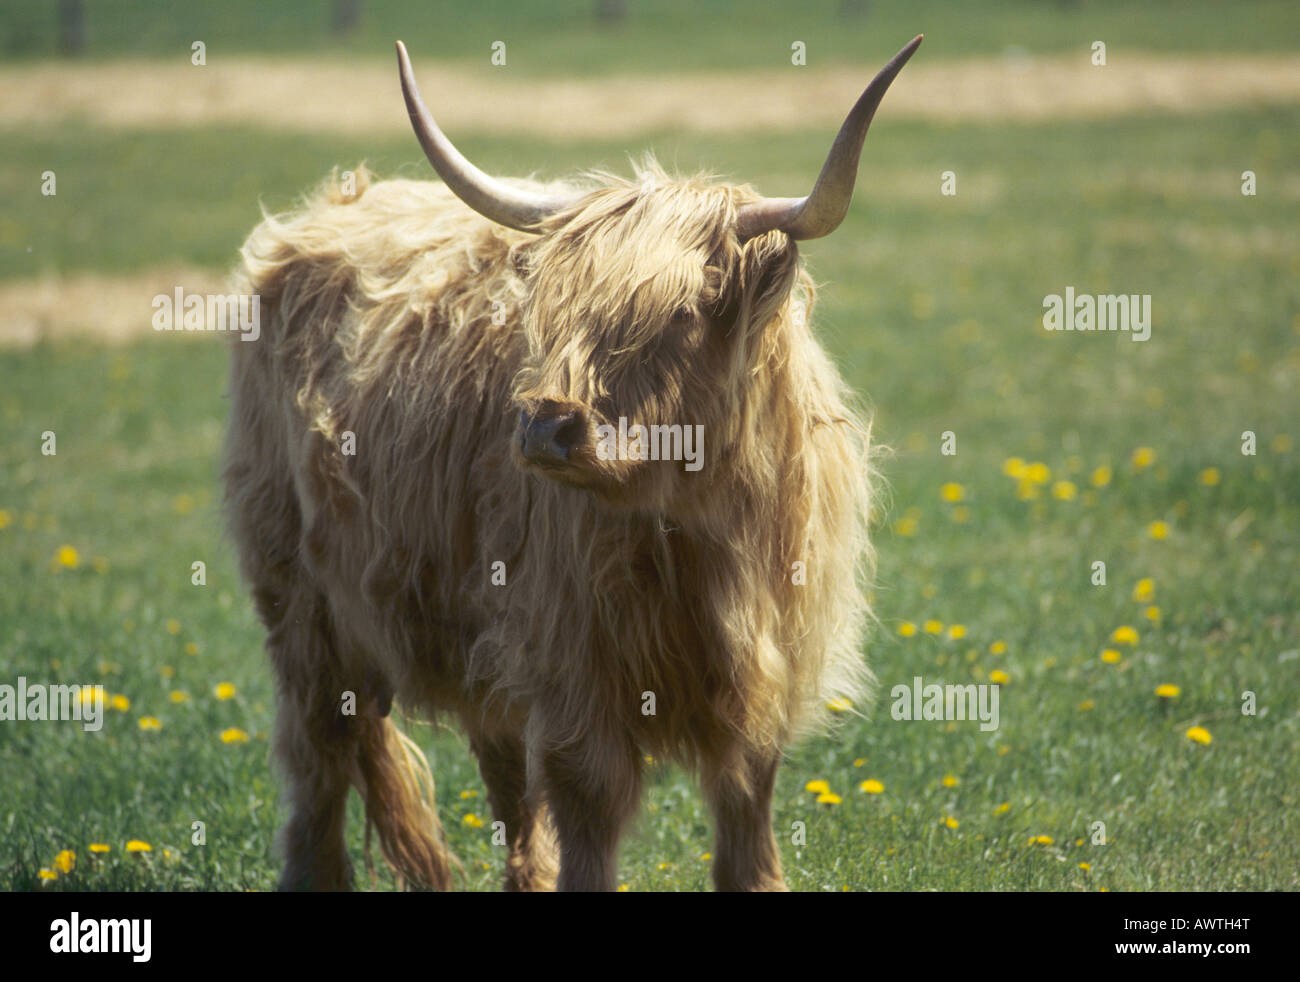 Highland Long-Haired cattle Stock Photo